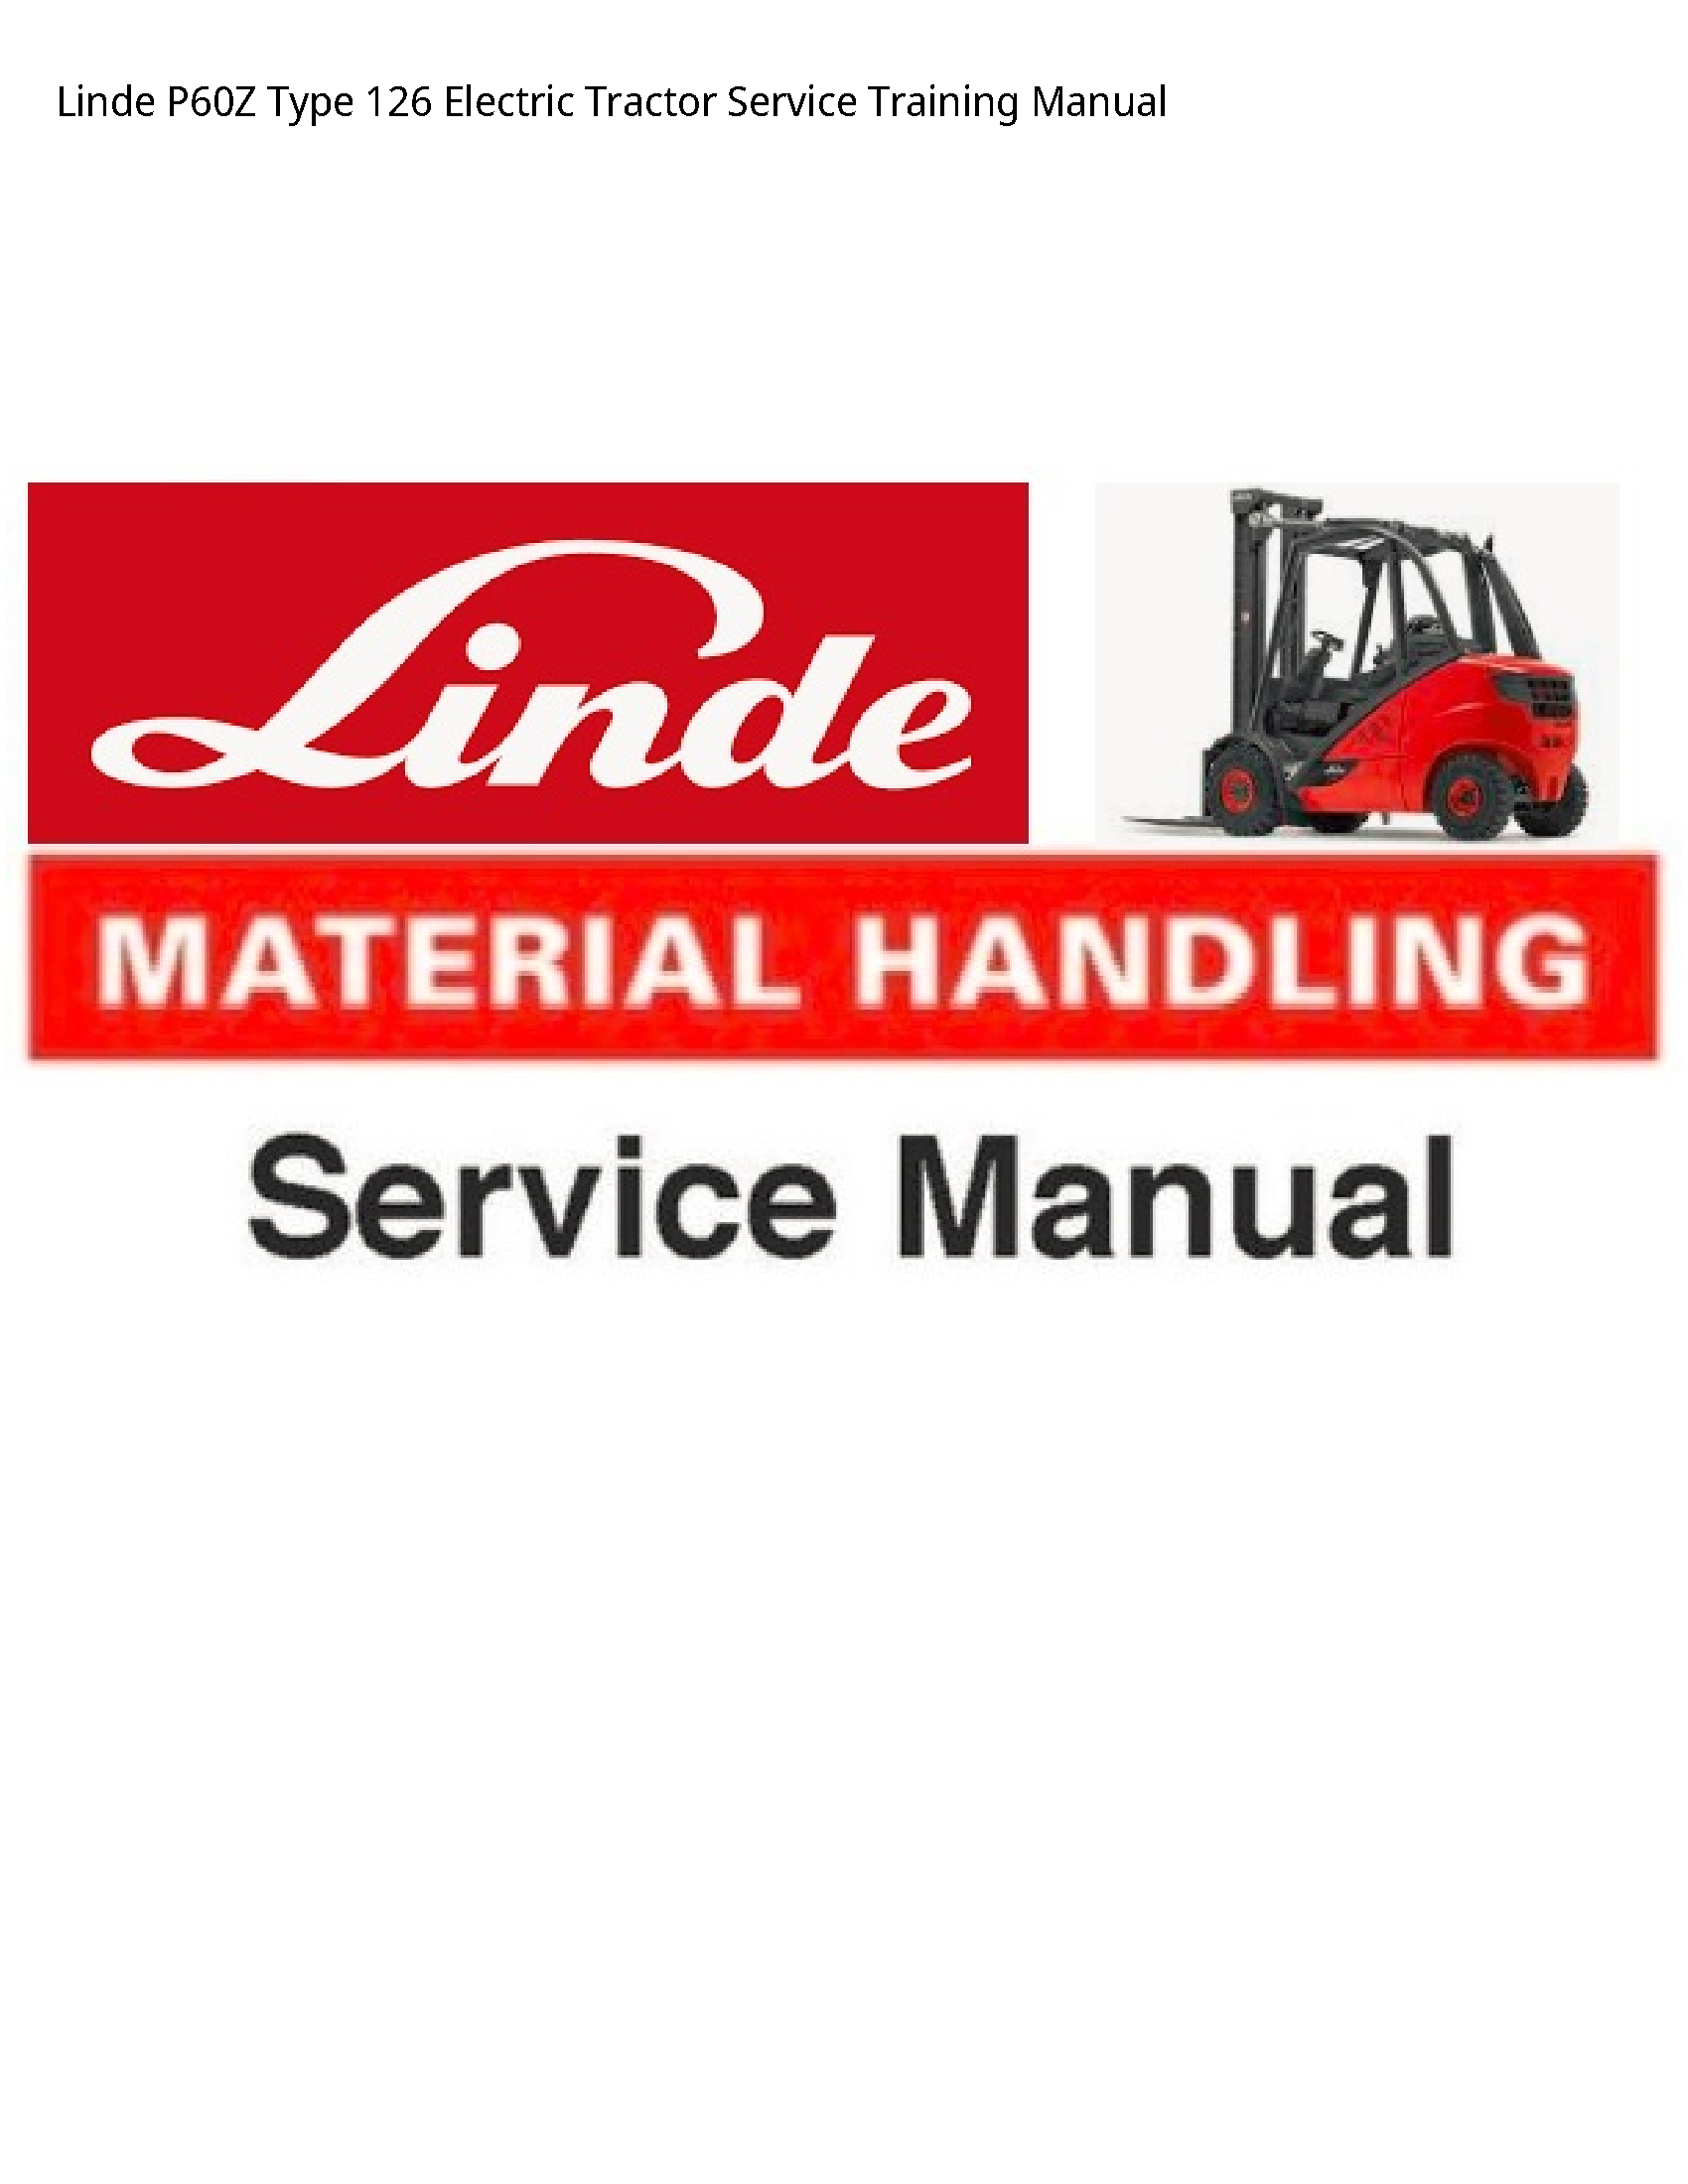 Linde P60Z Type Electric Tractor Service Training manual